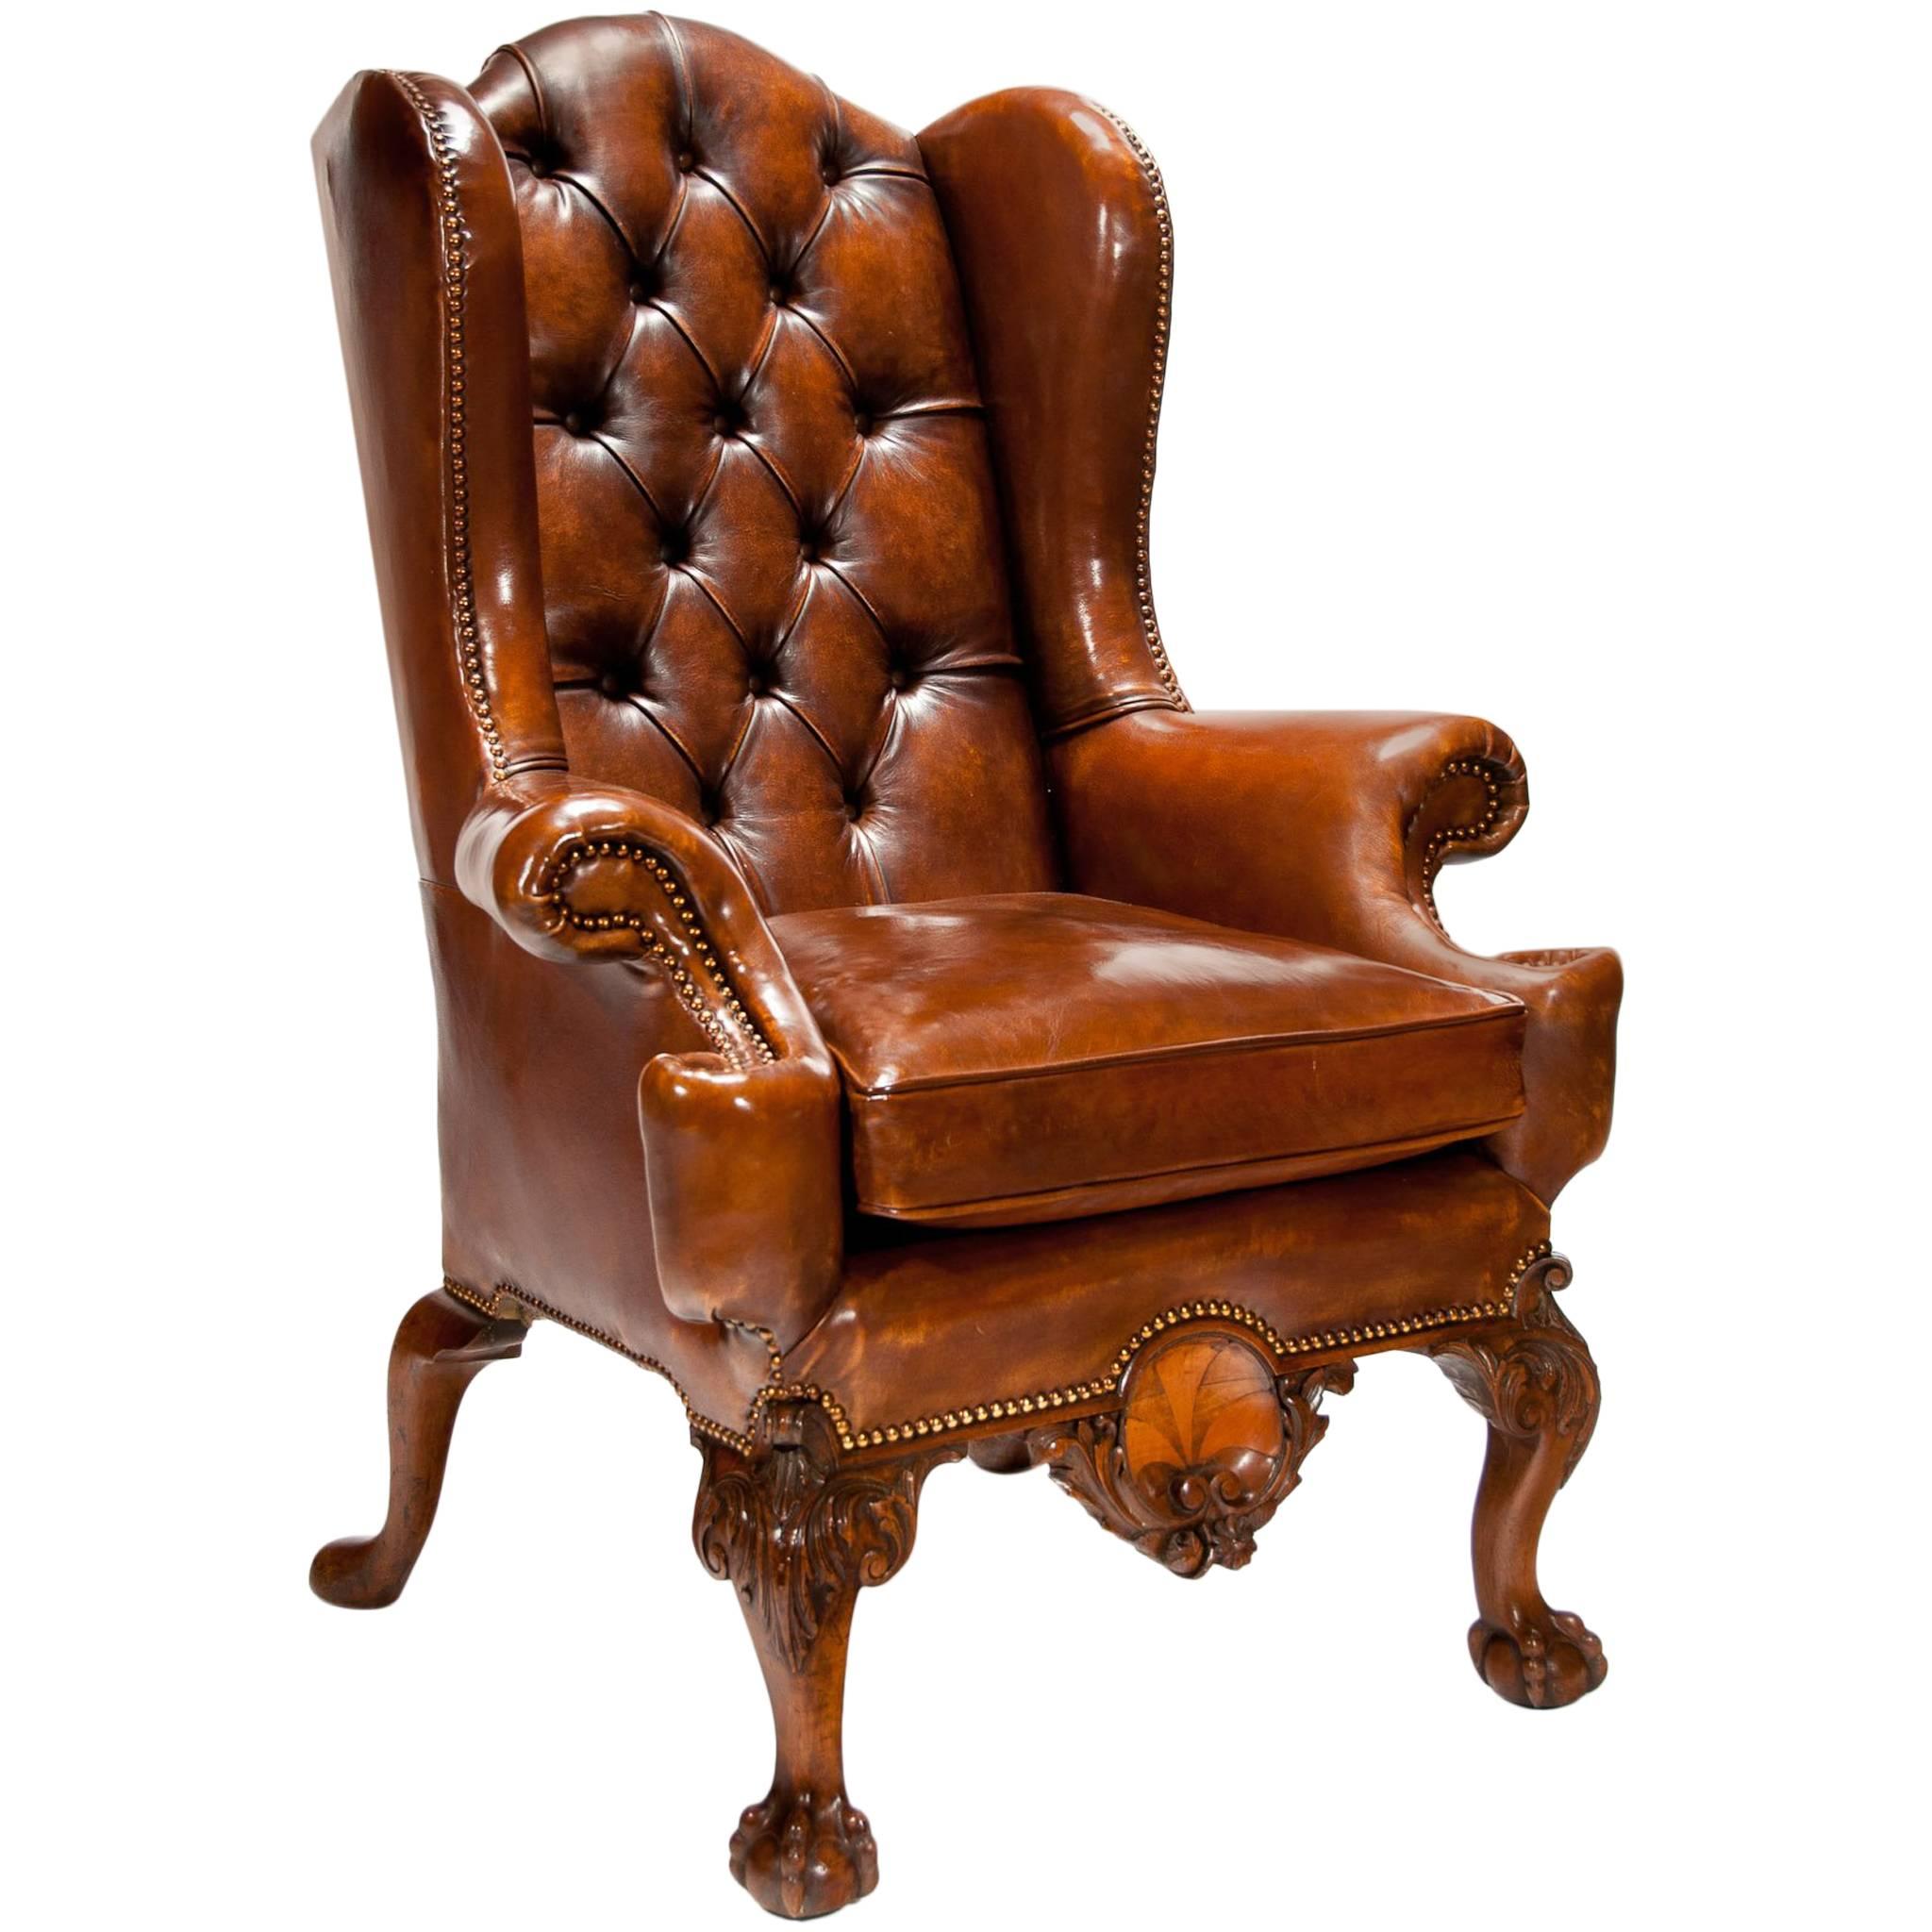 Exceptional 19th Century Walnut Leather Wing Back Armchair